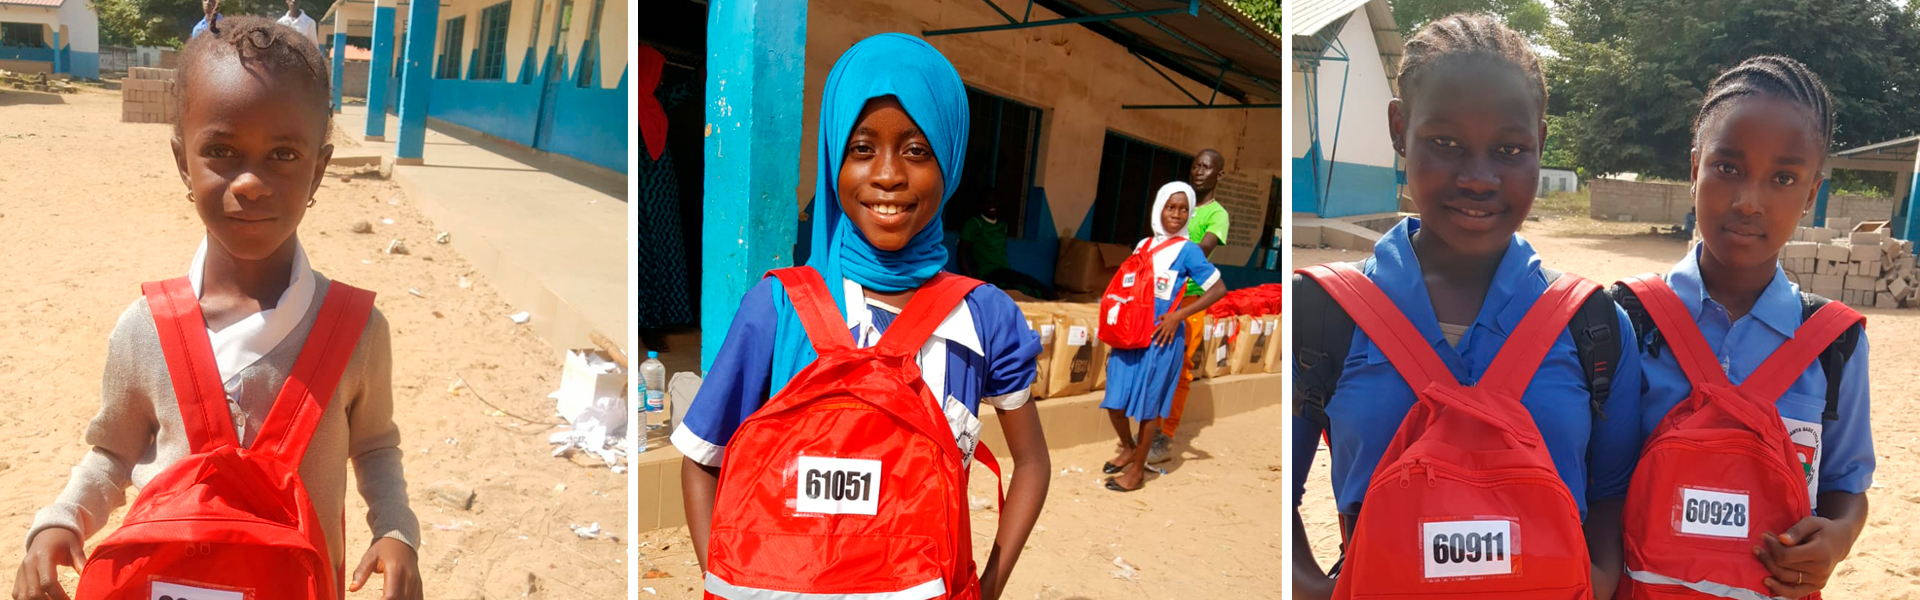 The Gambia School Bag Gallery 2